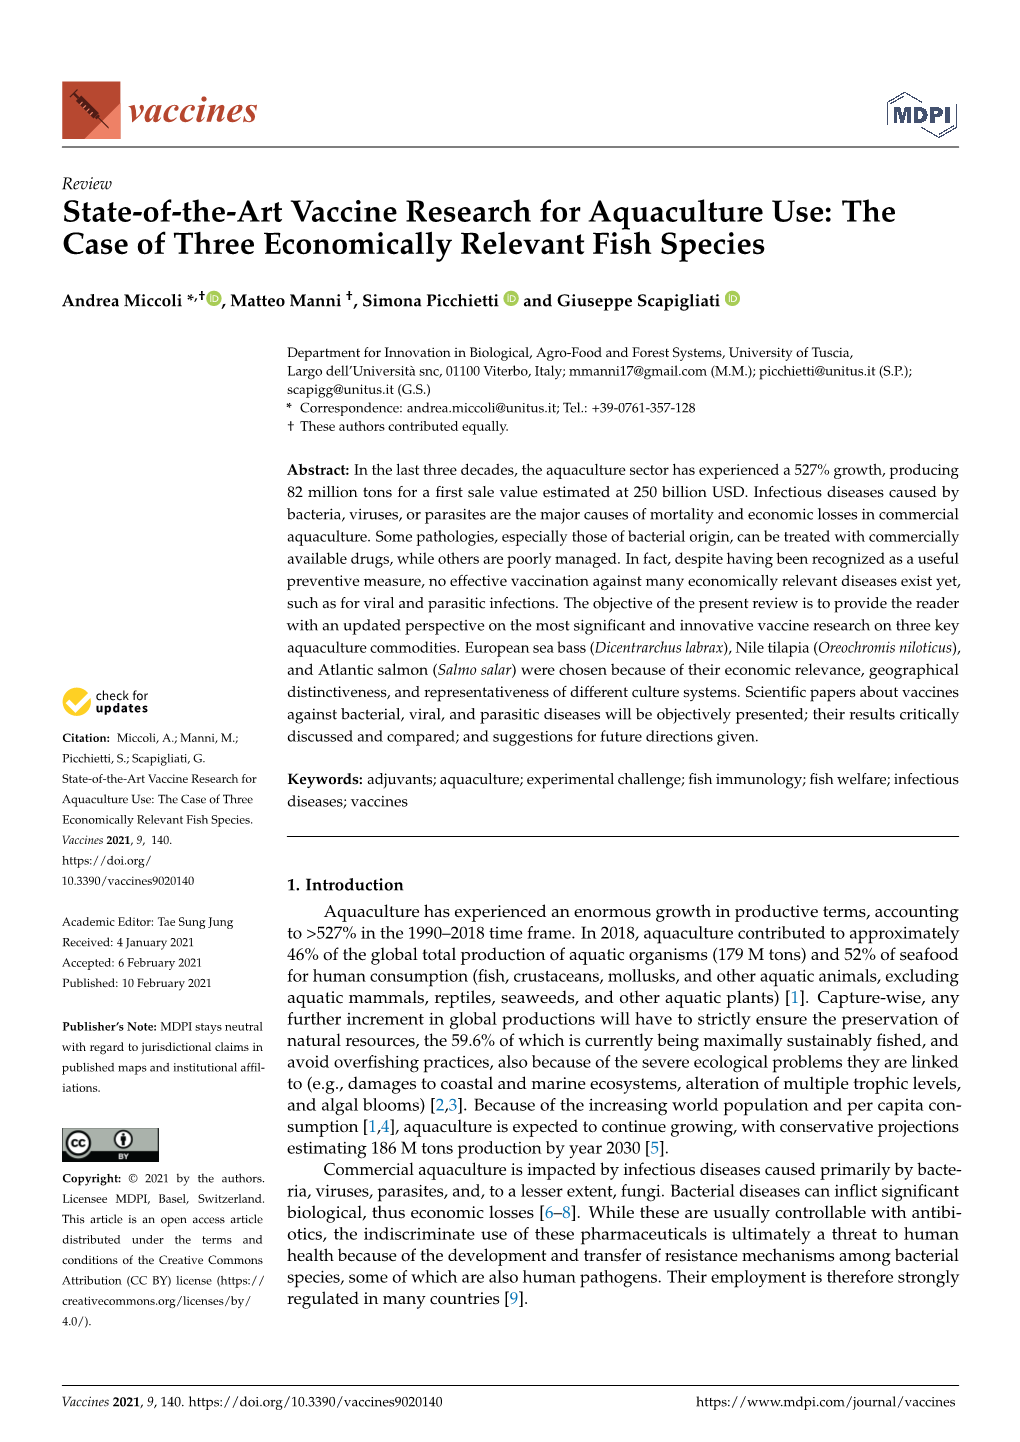 State-Of-The-Art Vaccine Research for Aquaculture Use: the Case of Three Economically Relevant Fish Species